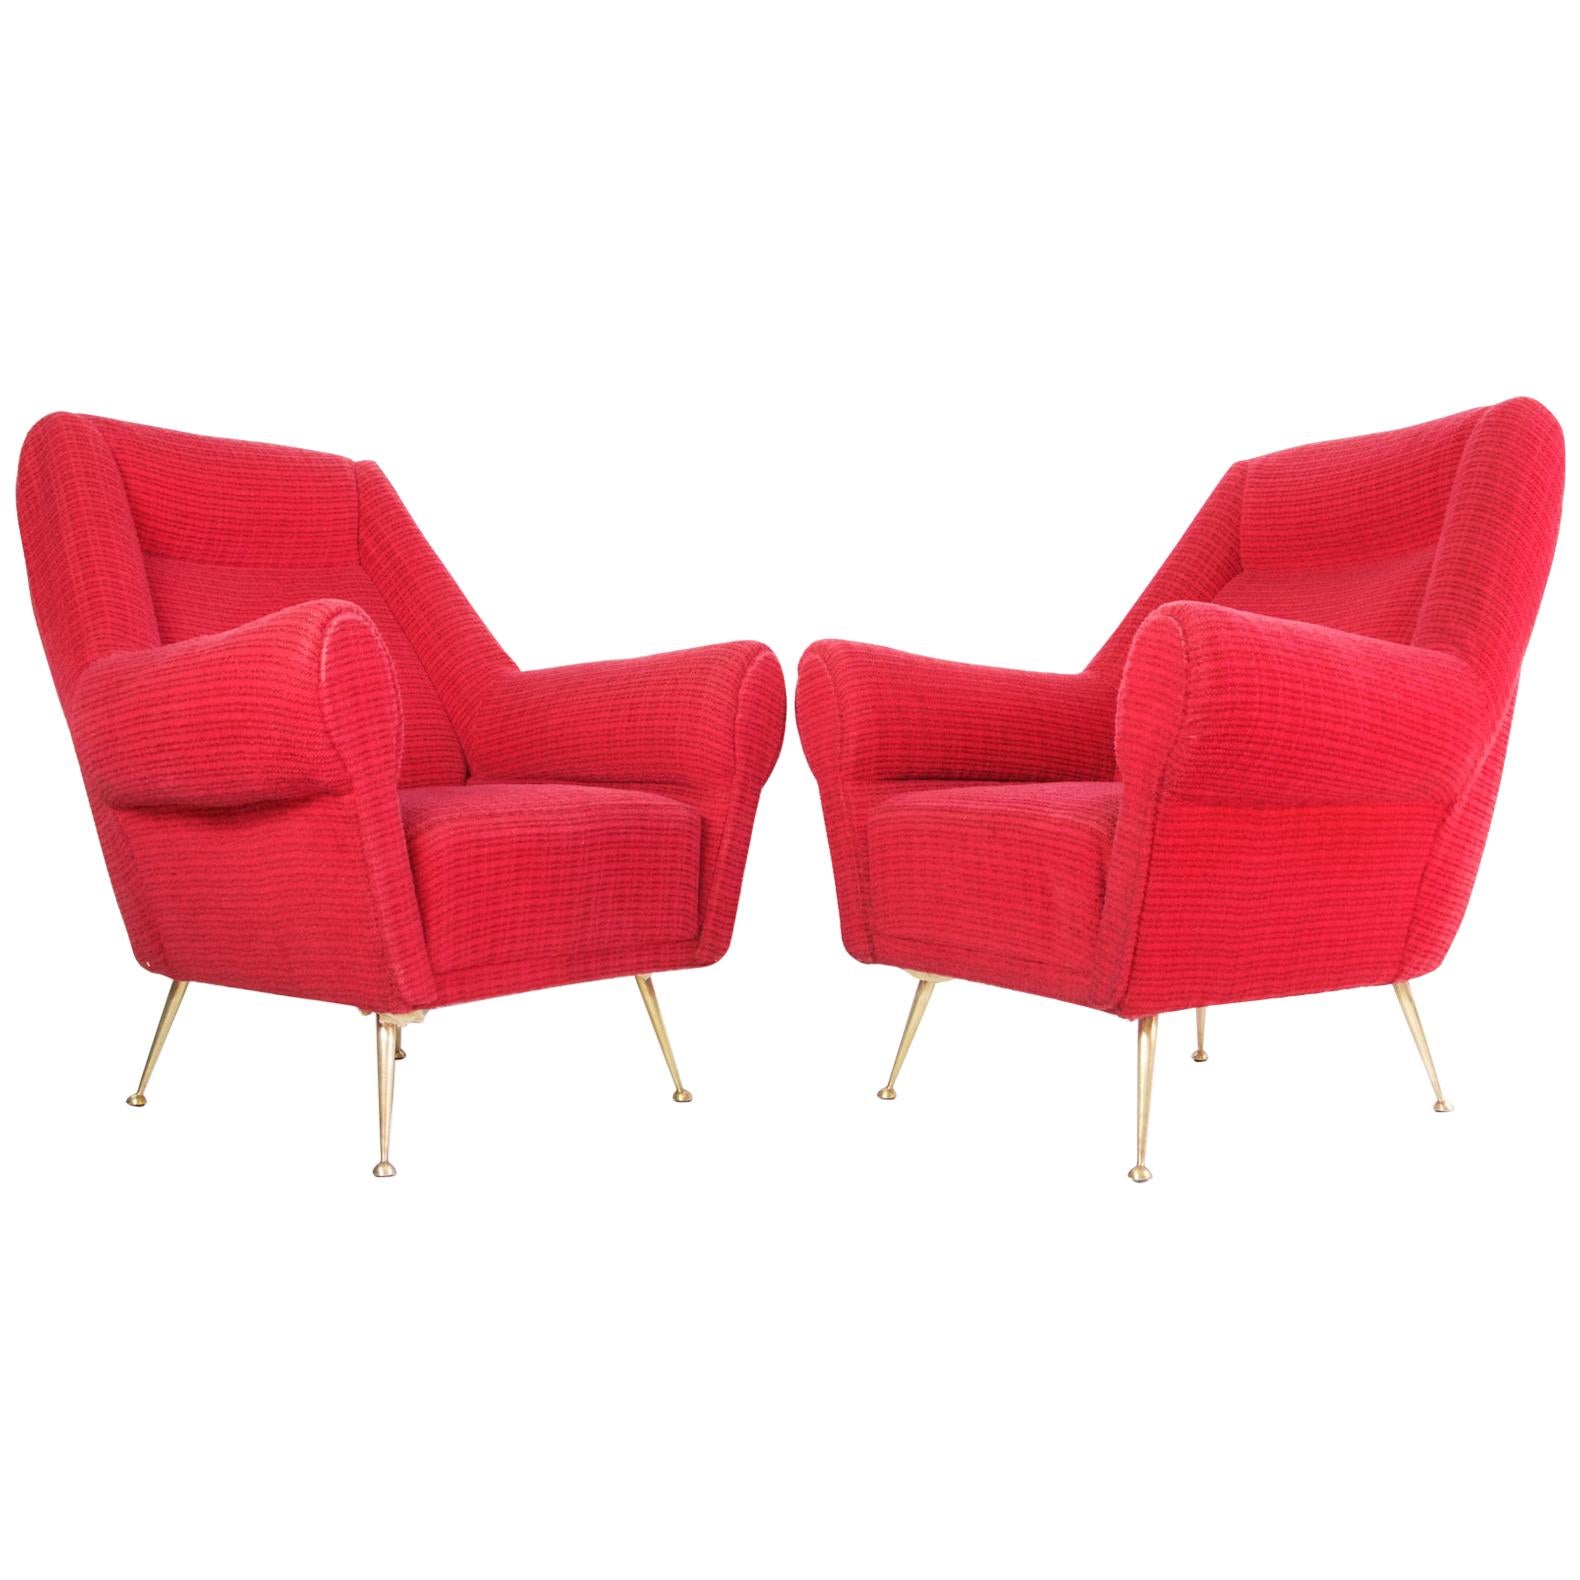 Mid-Century Modern Pair of Midcentury Armchairs by Gigi Radice for Minotti, Italy For Sale